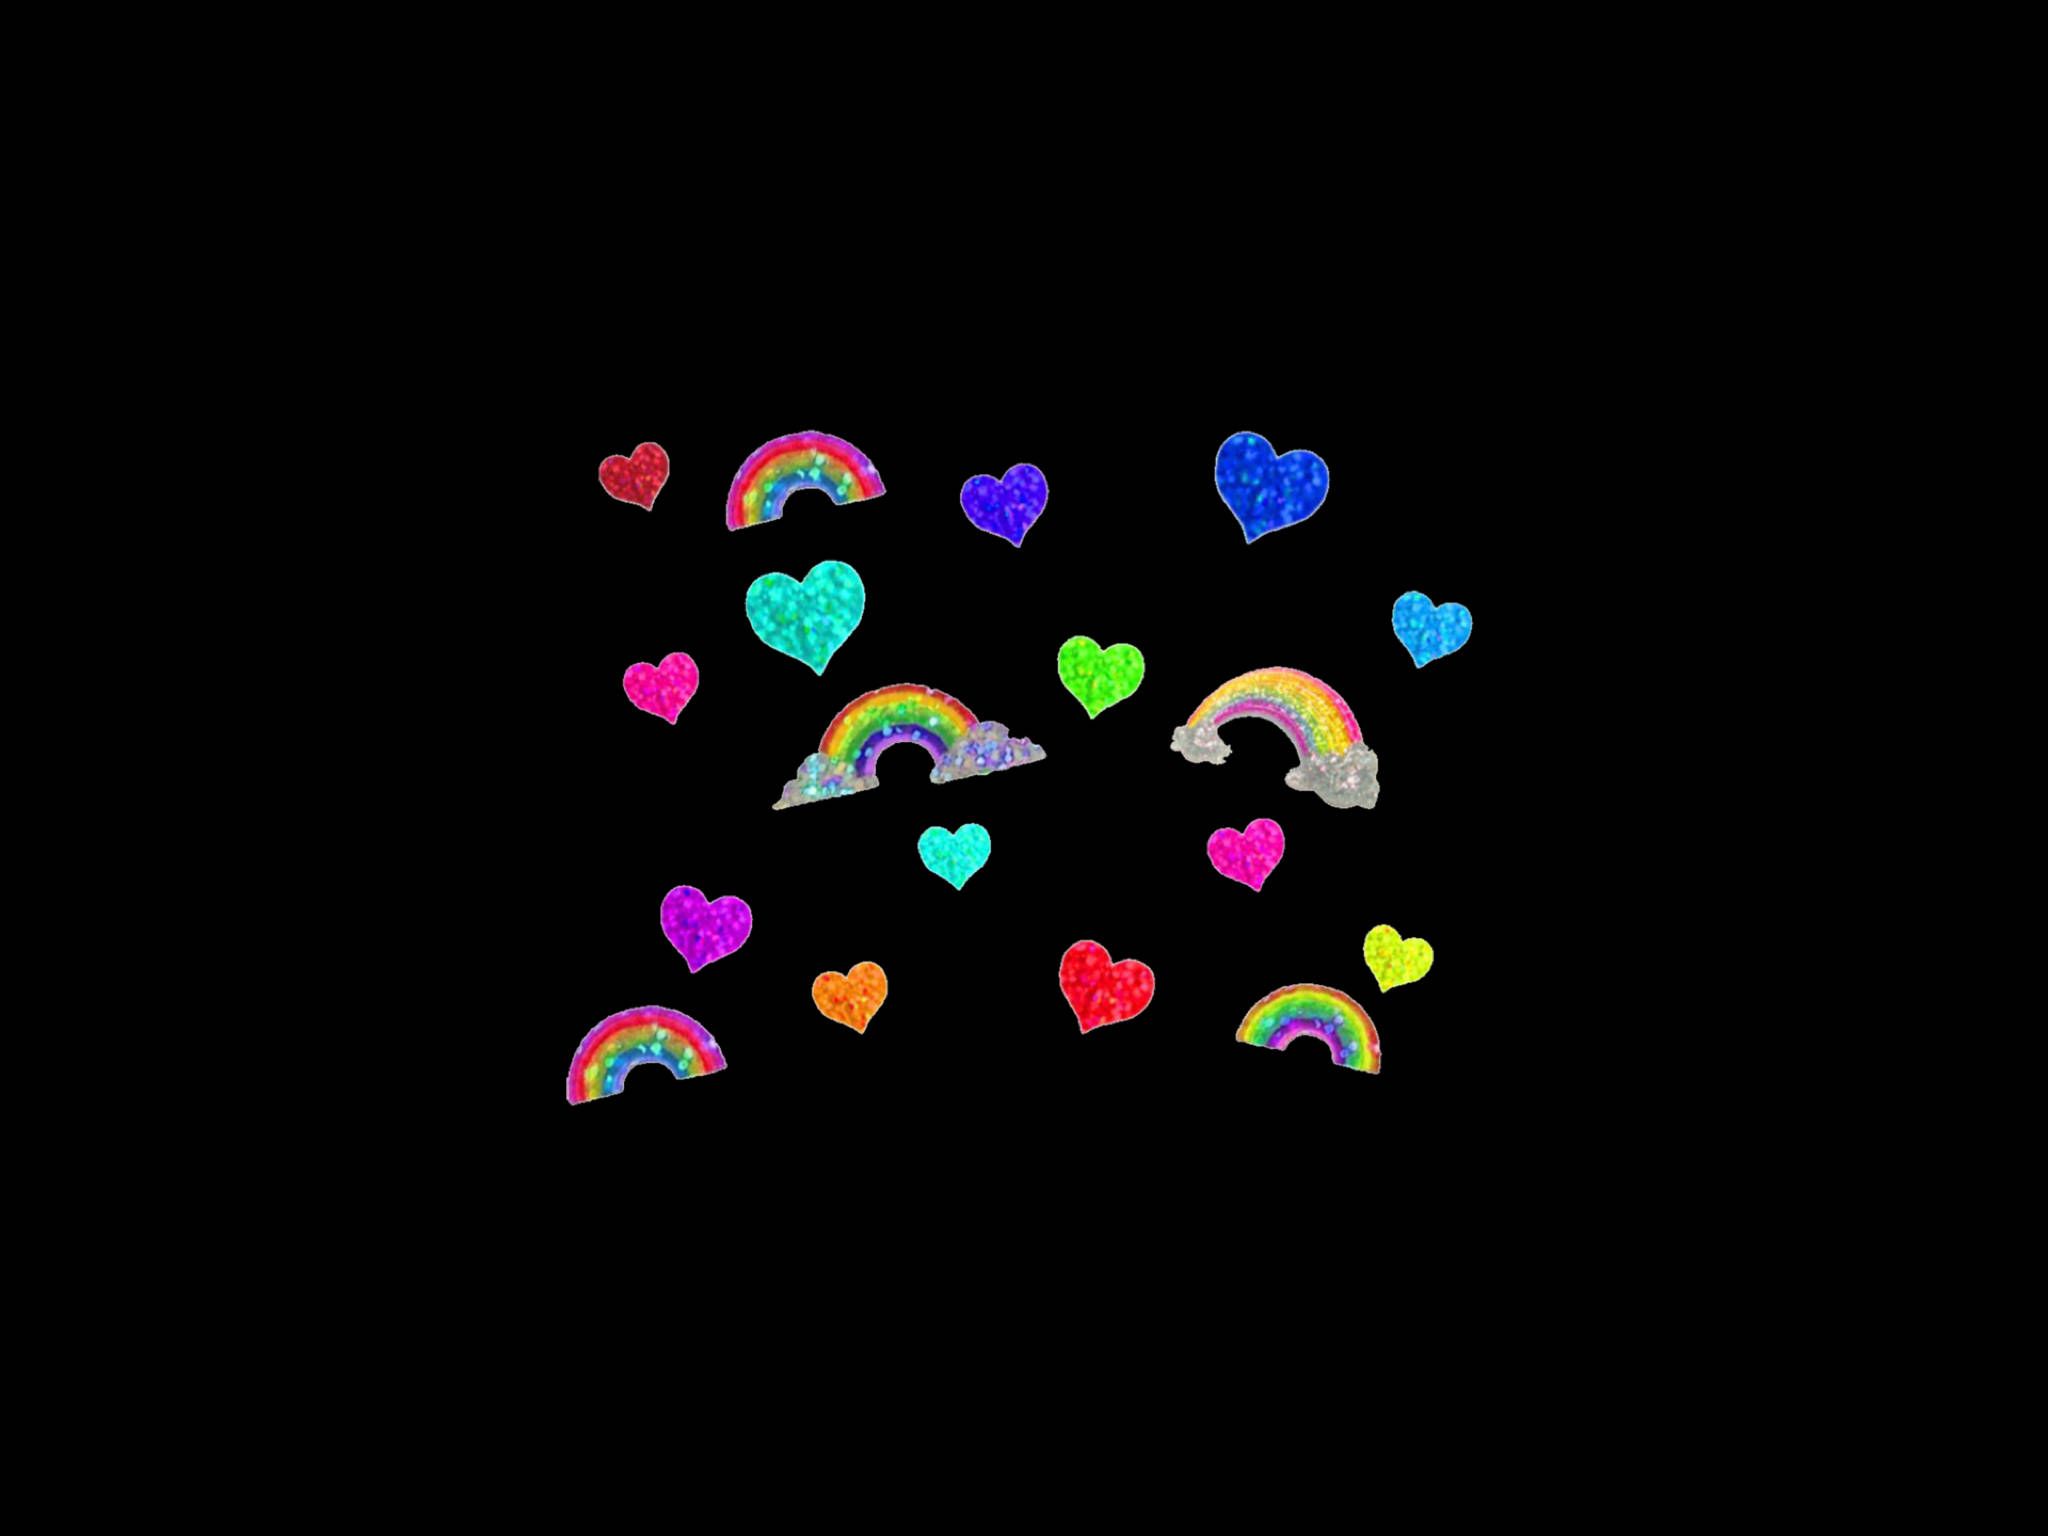 A group of hearts and rainbows on black background - Kidcore